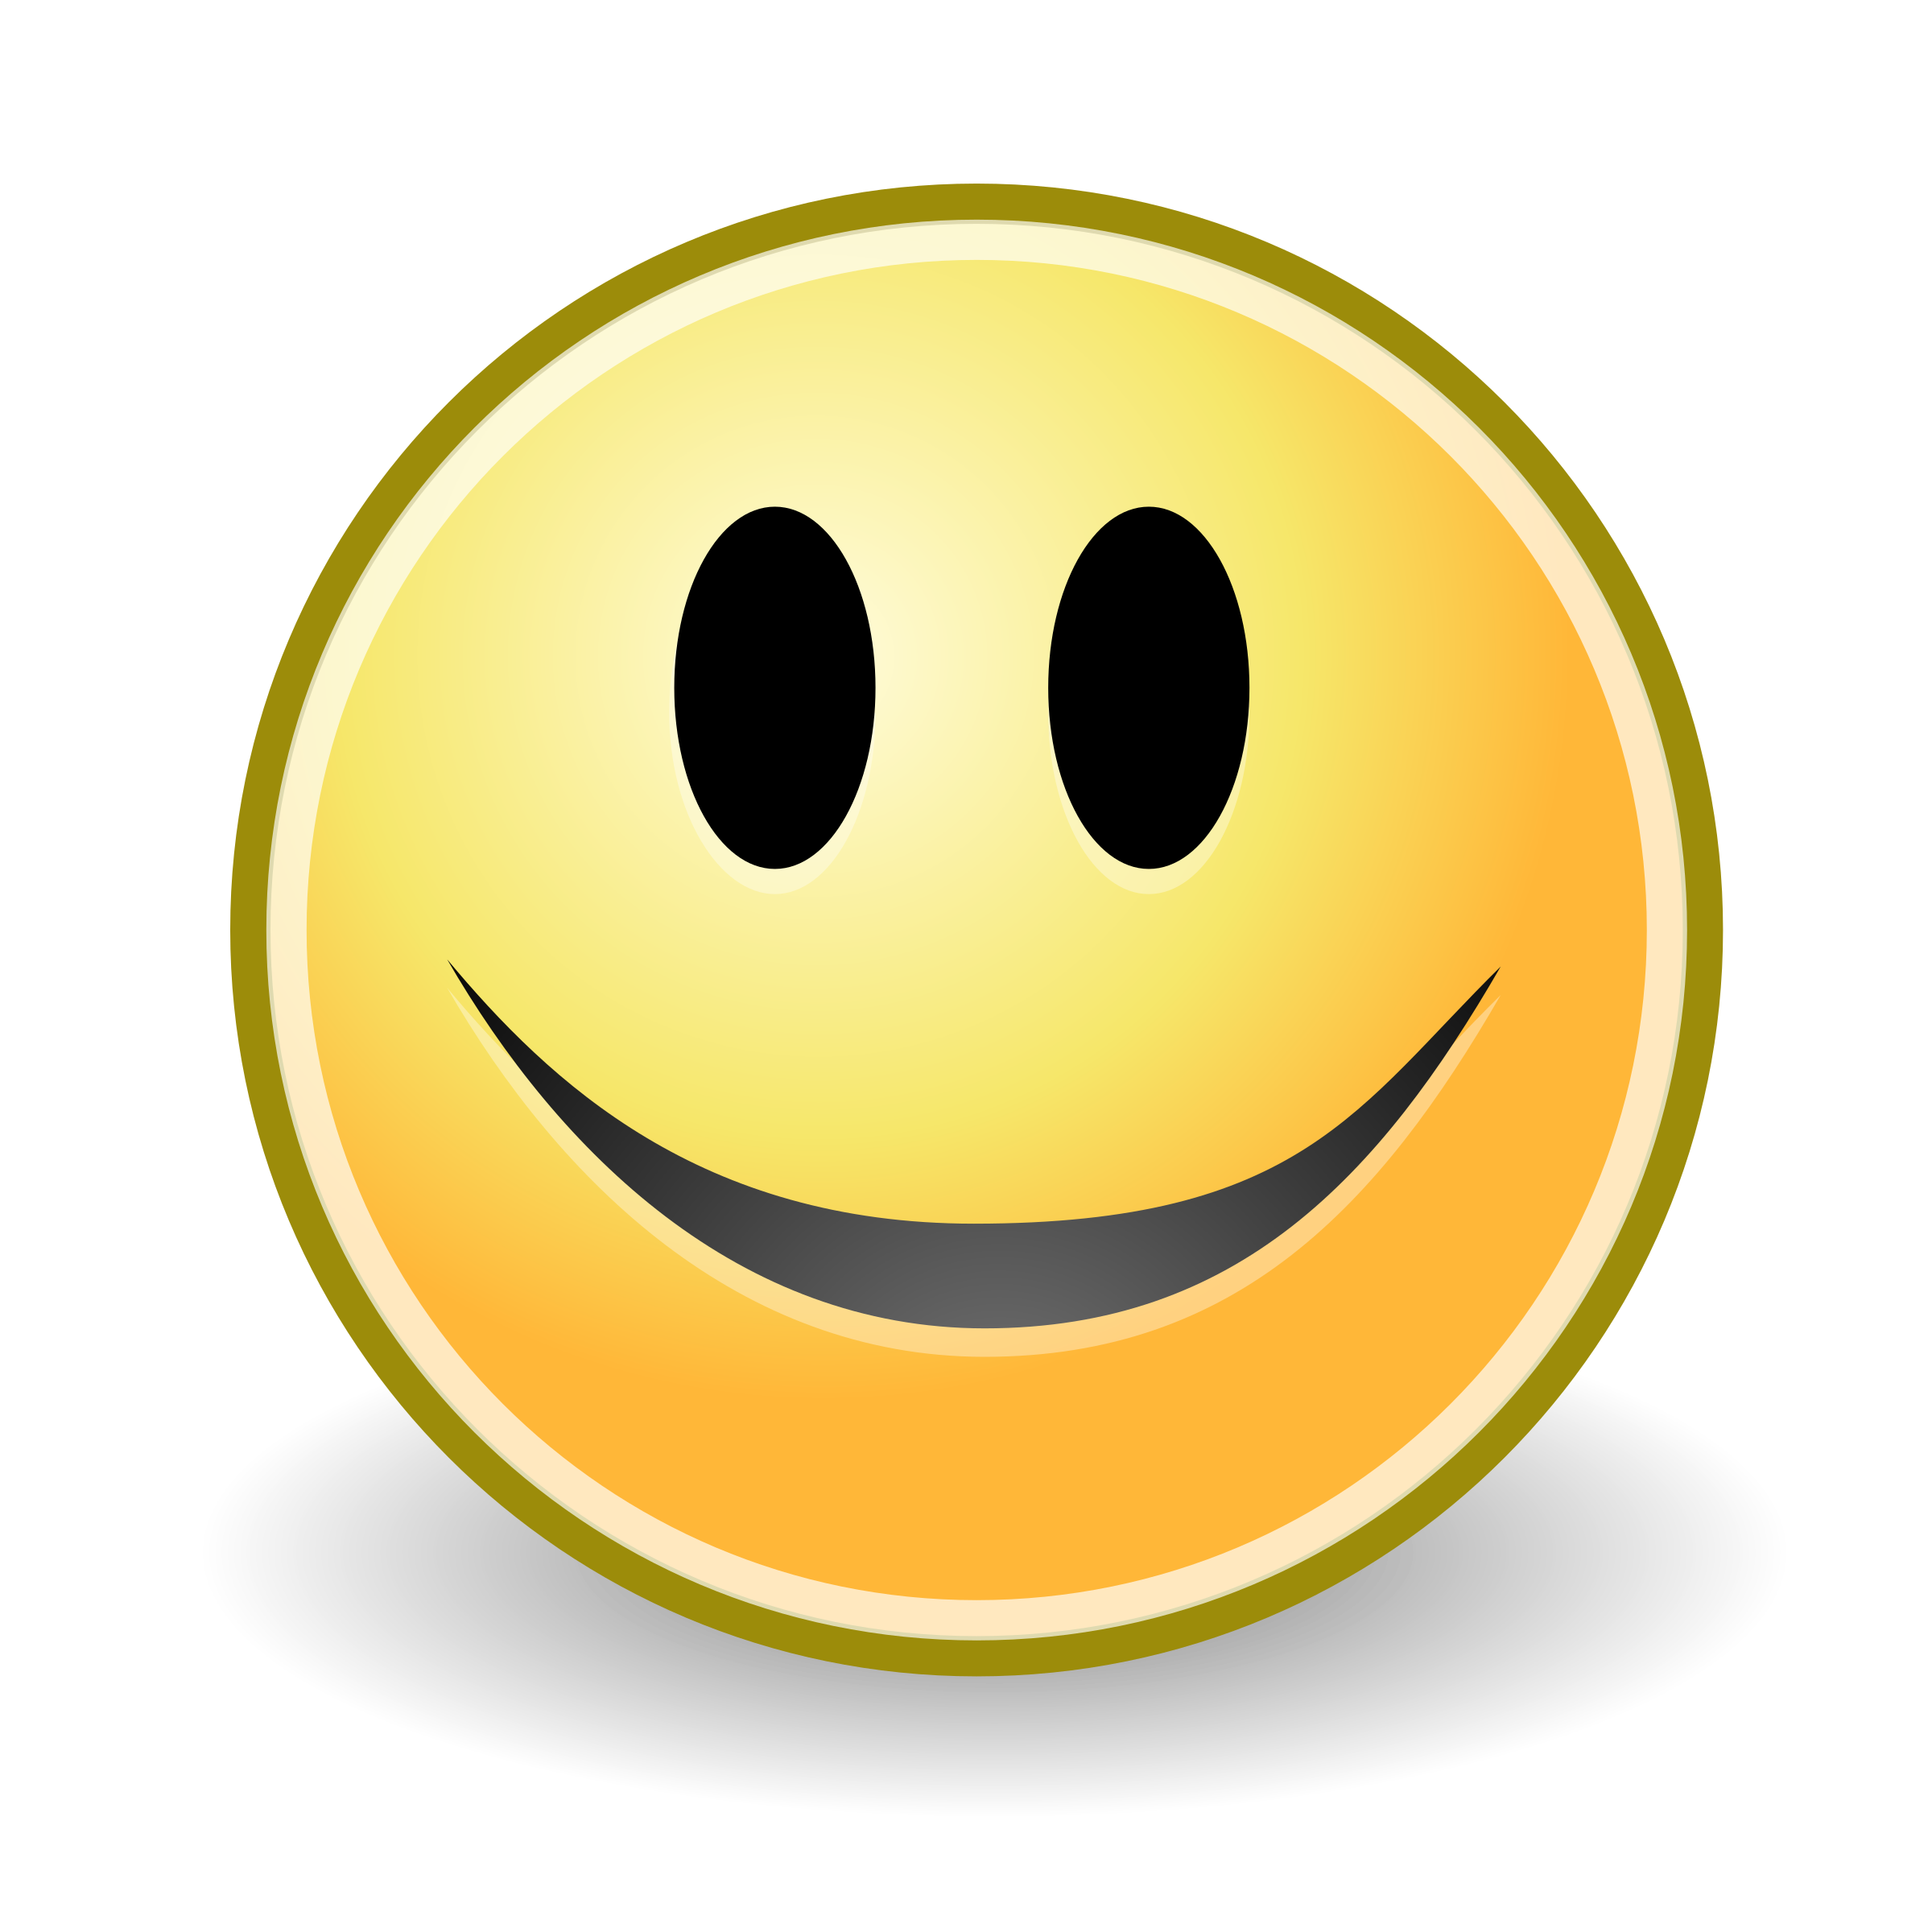 Smile smiling person clip art free clipart images - dbclipart.com